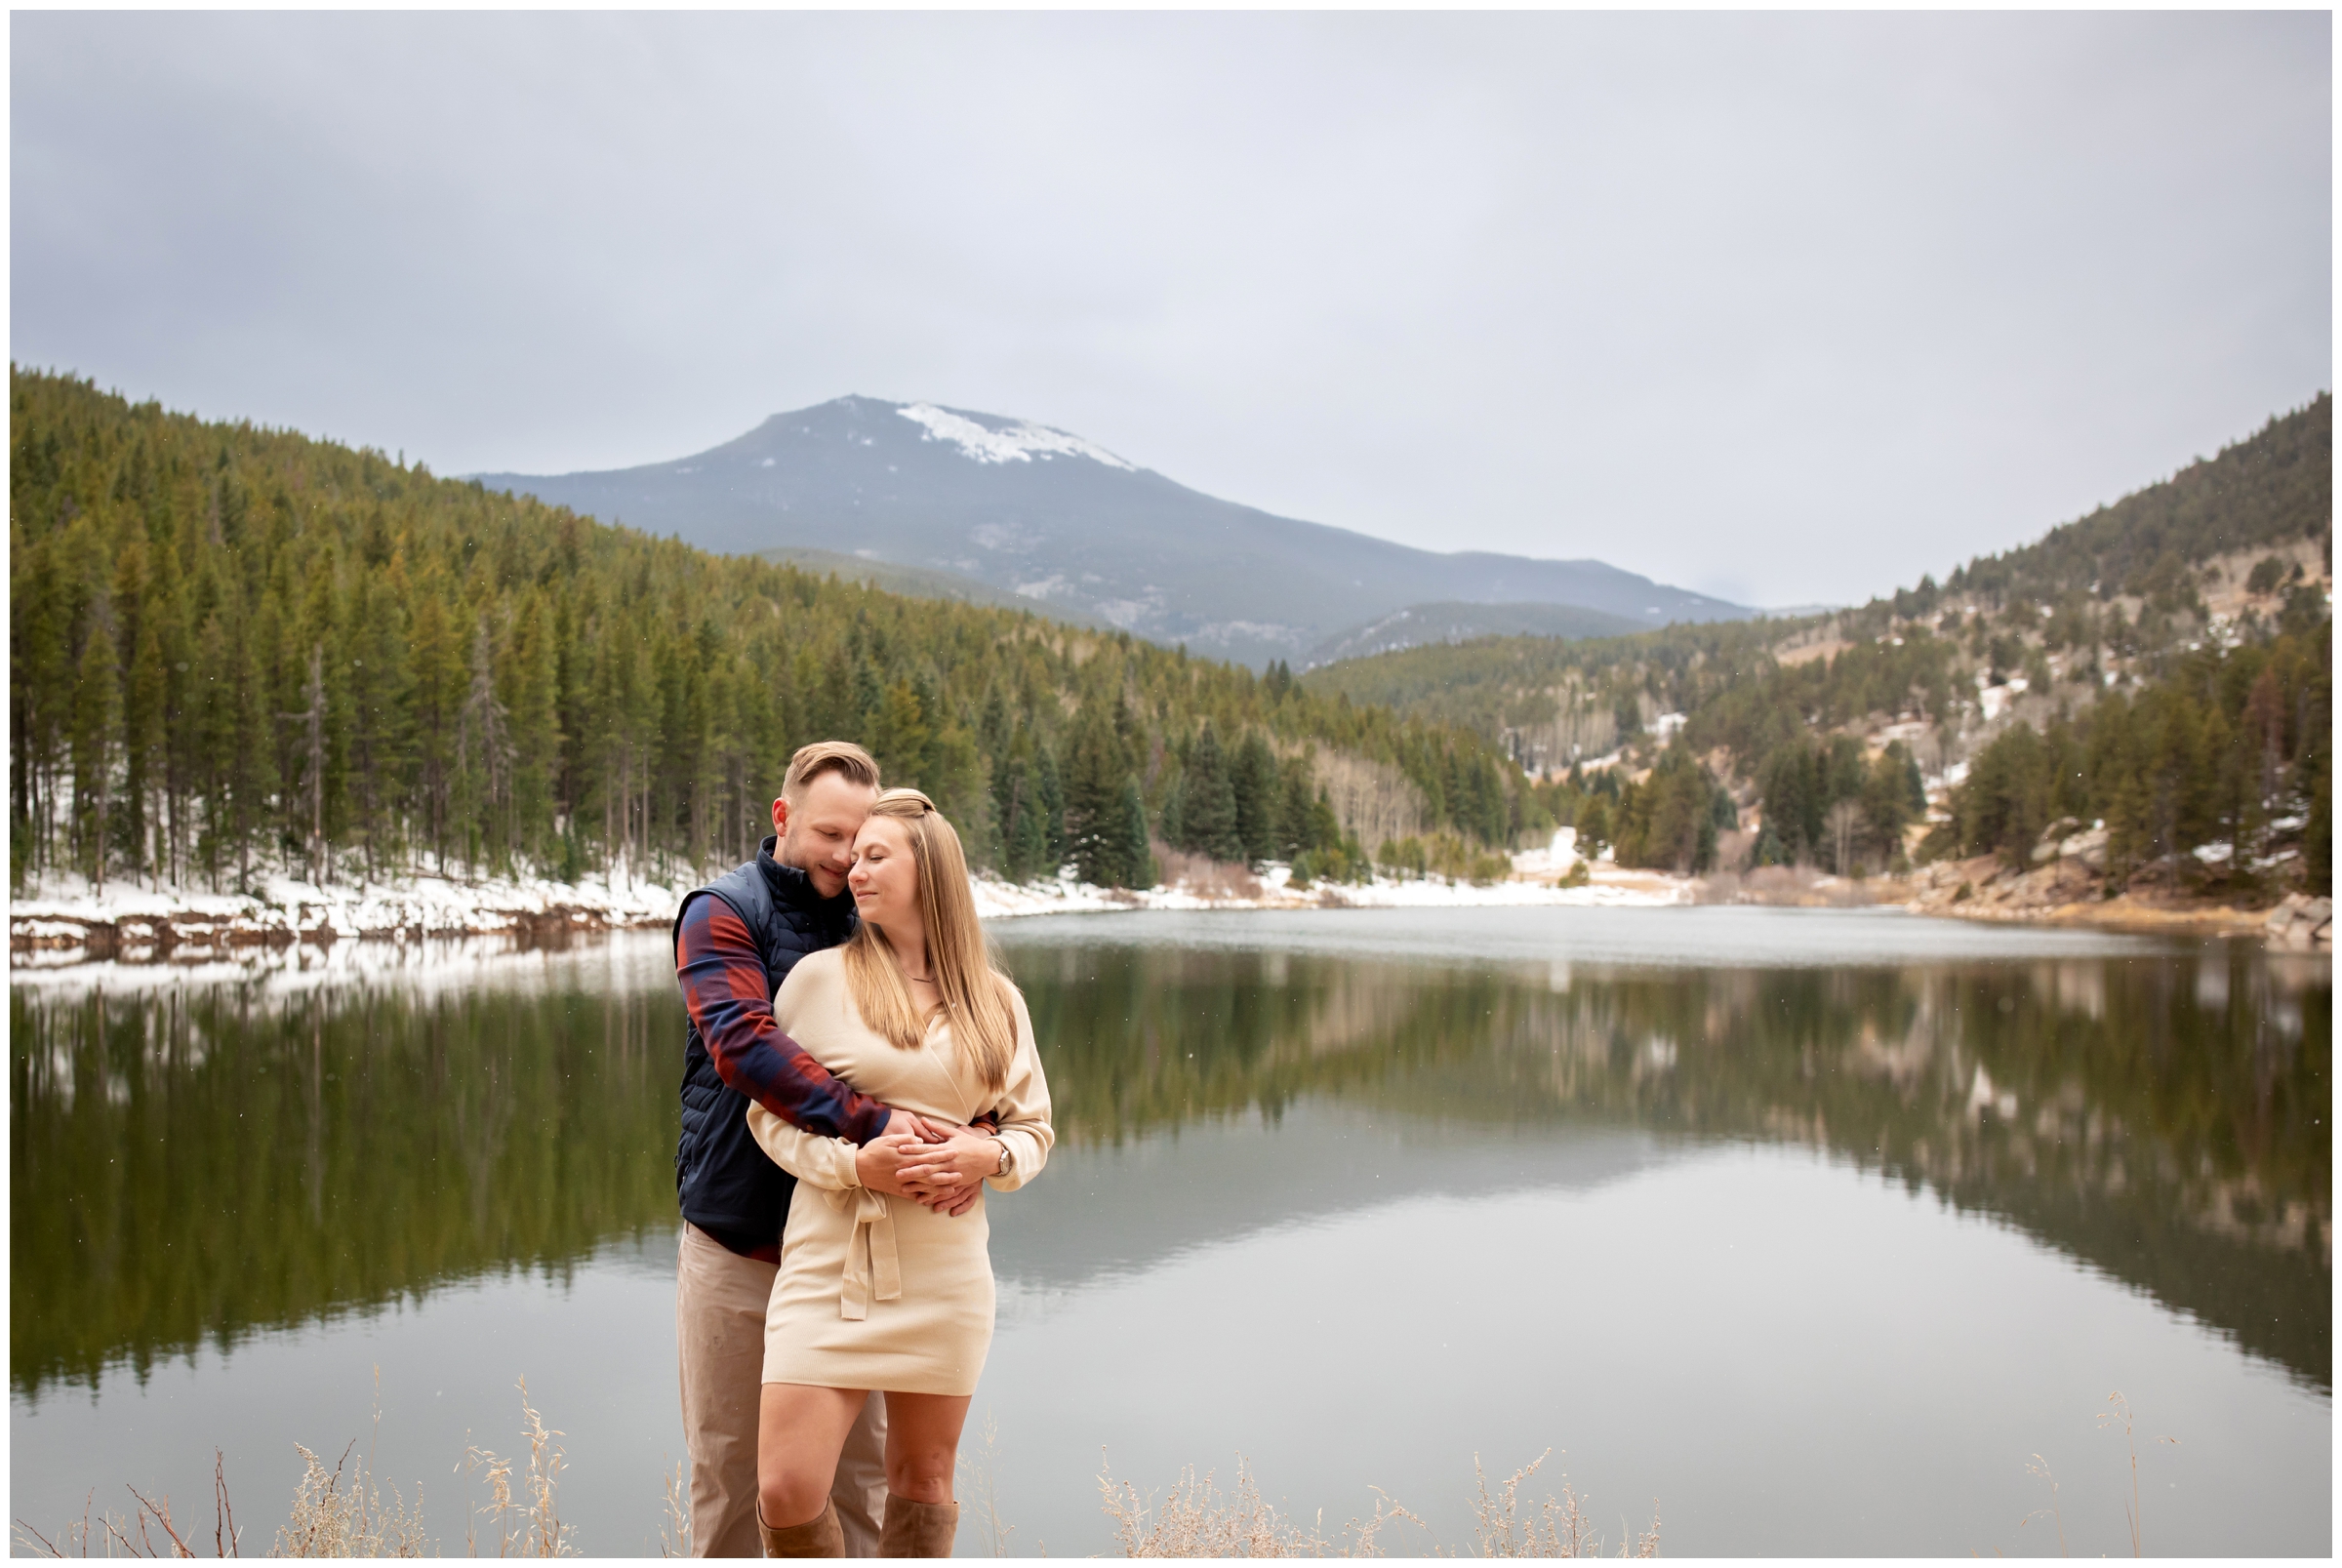 Evergreen Colorado couples photos at Beaver Brook Watershed by mountain photographer Plum Pretty Photography